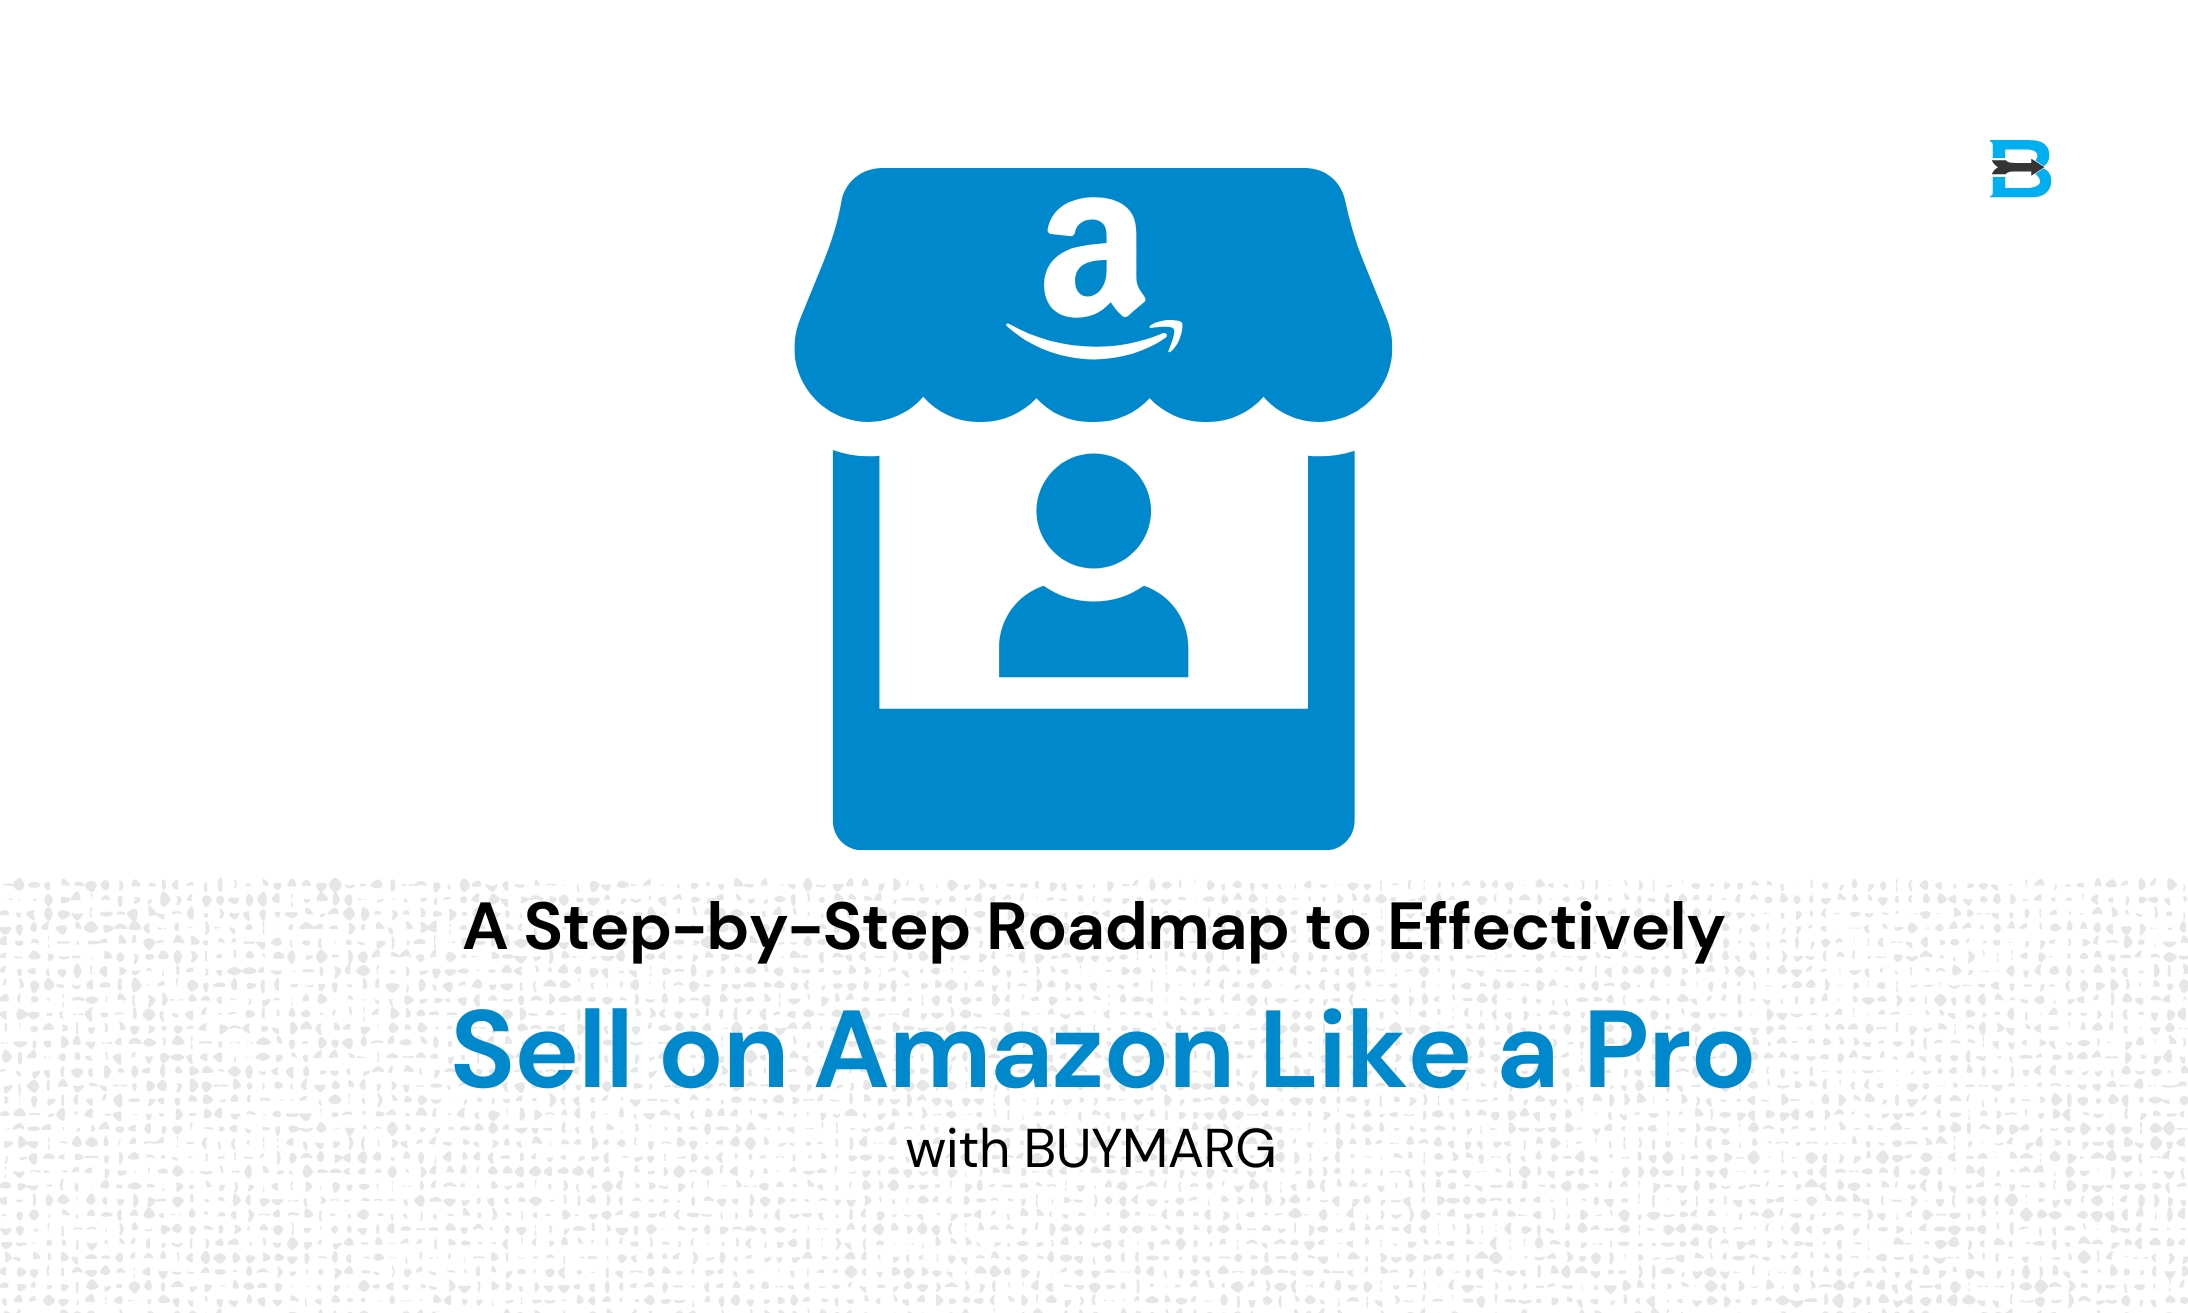 A Step-by-Step Roadmap to Effectively Sell on Amazon Like a Pro with BUYMARG